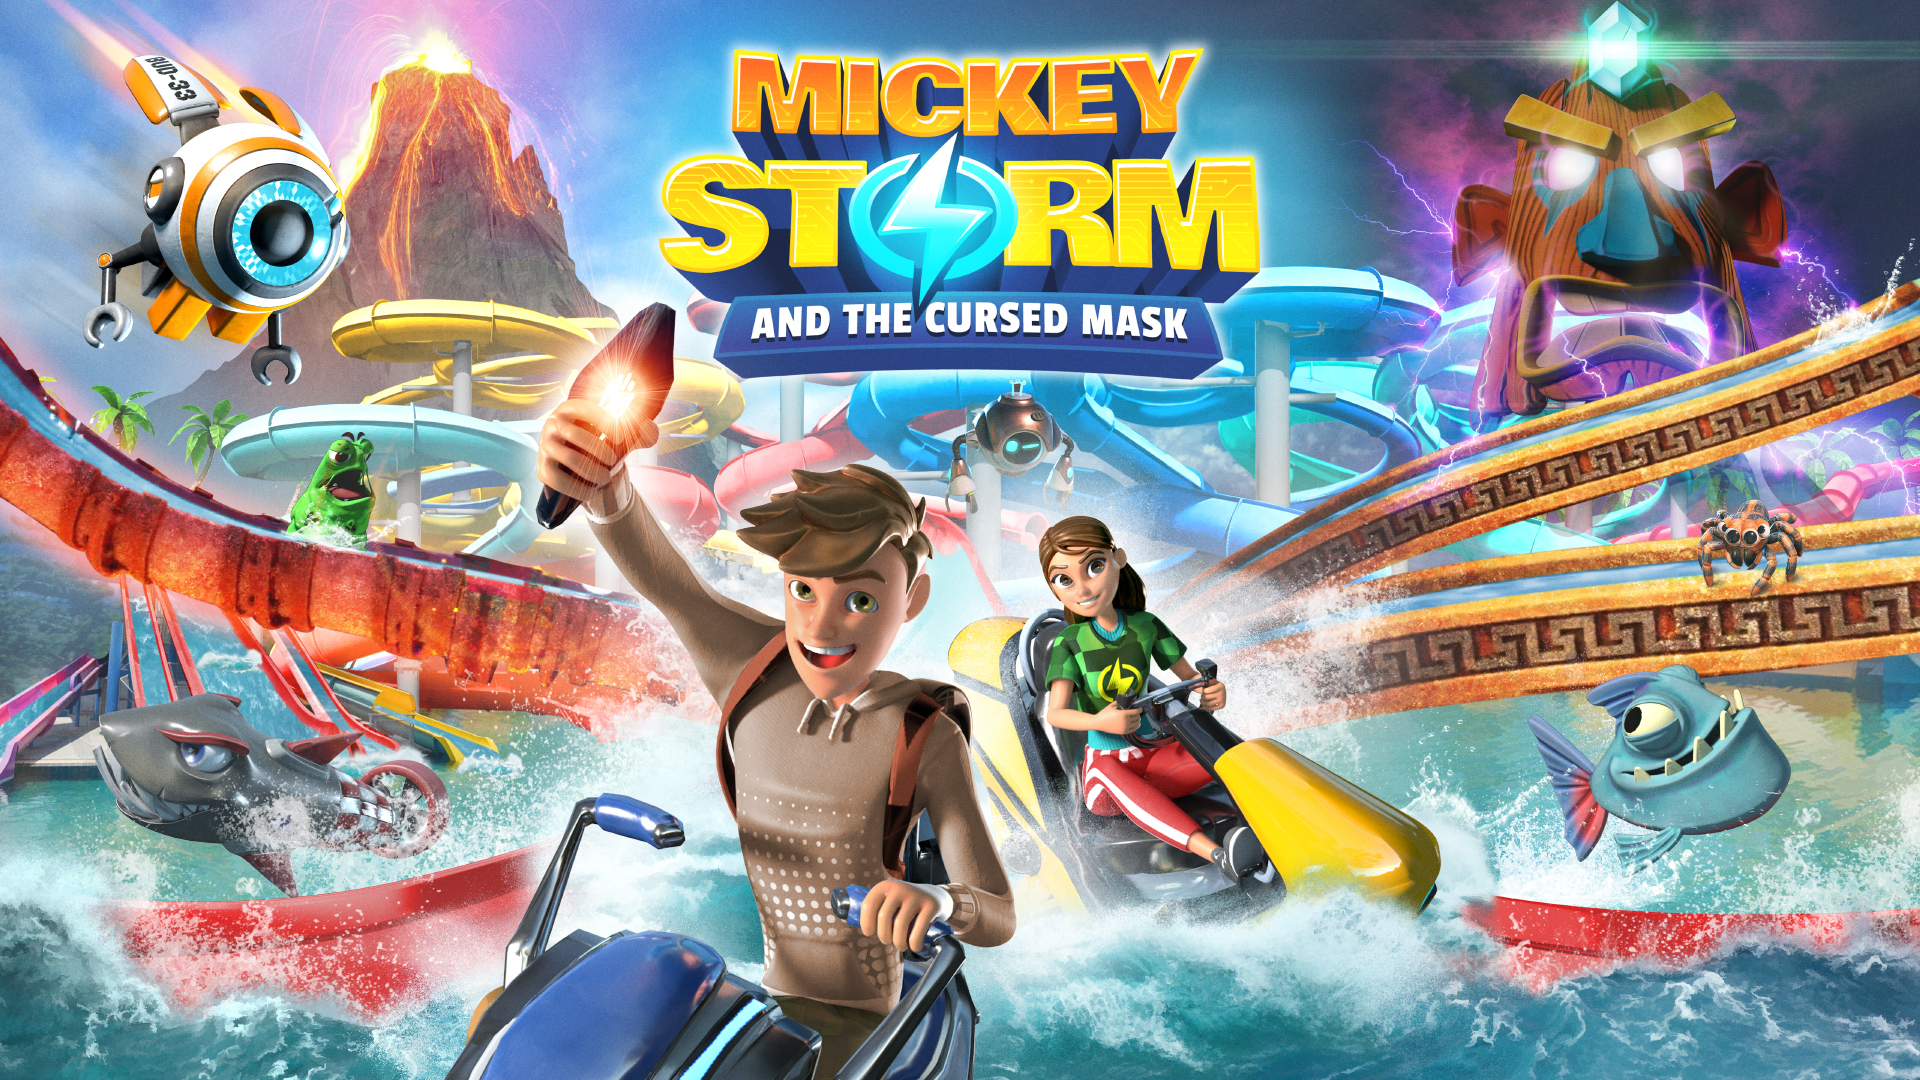 Against the Storm - Metacritic